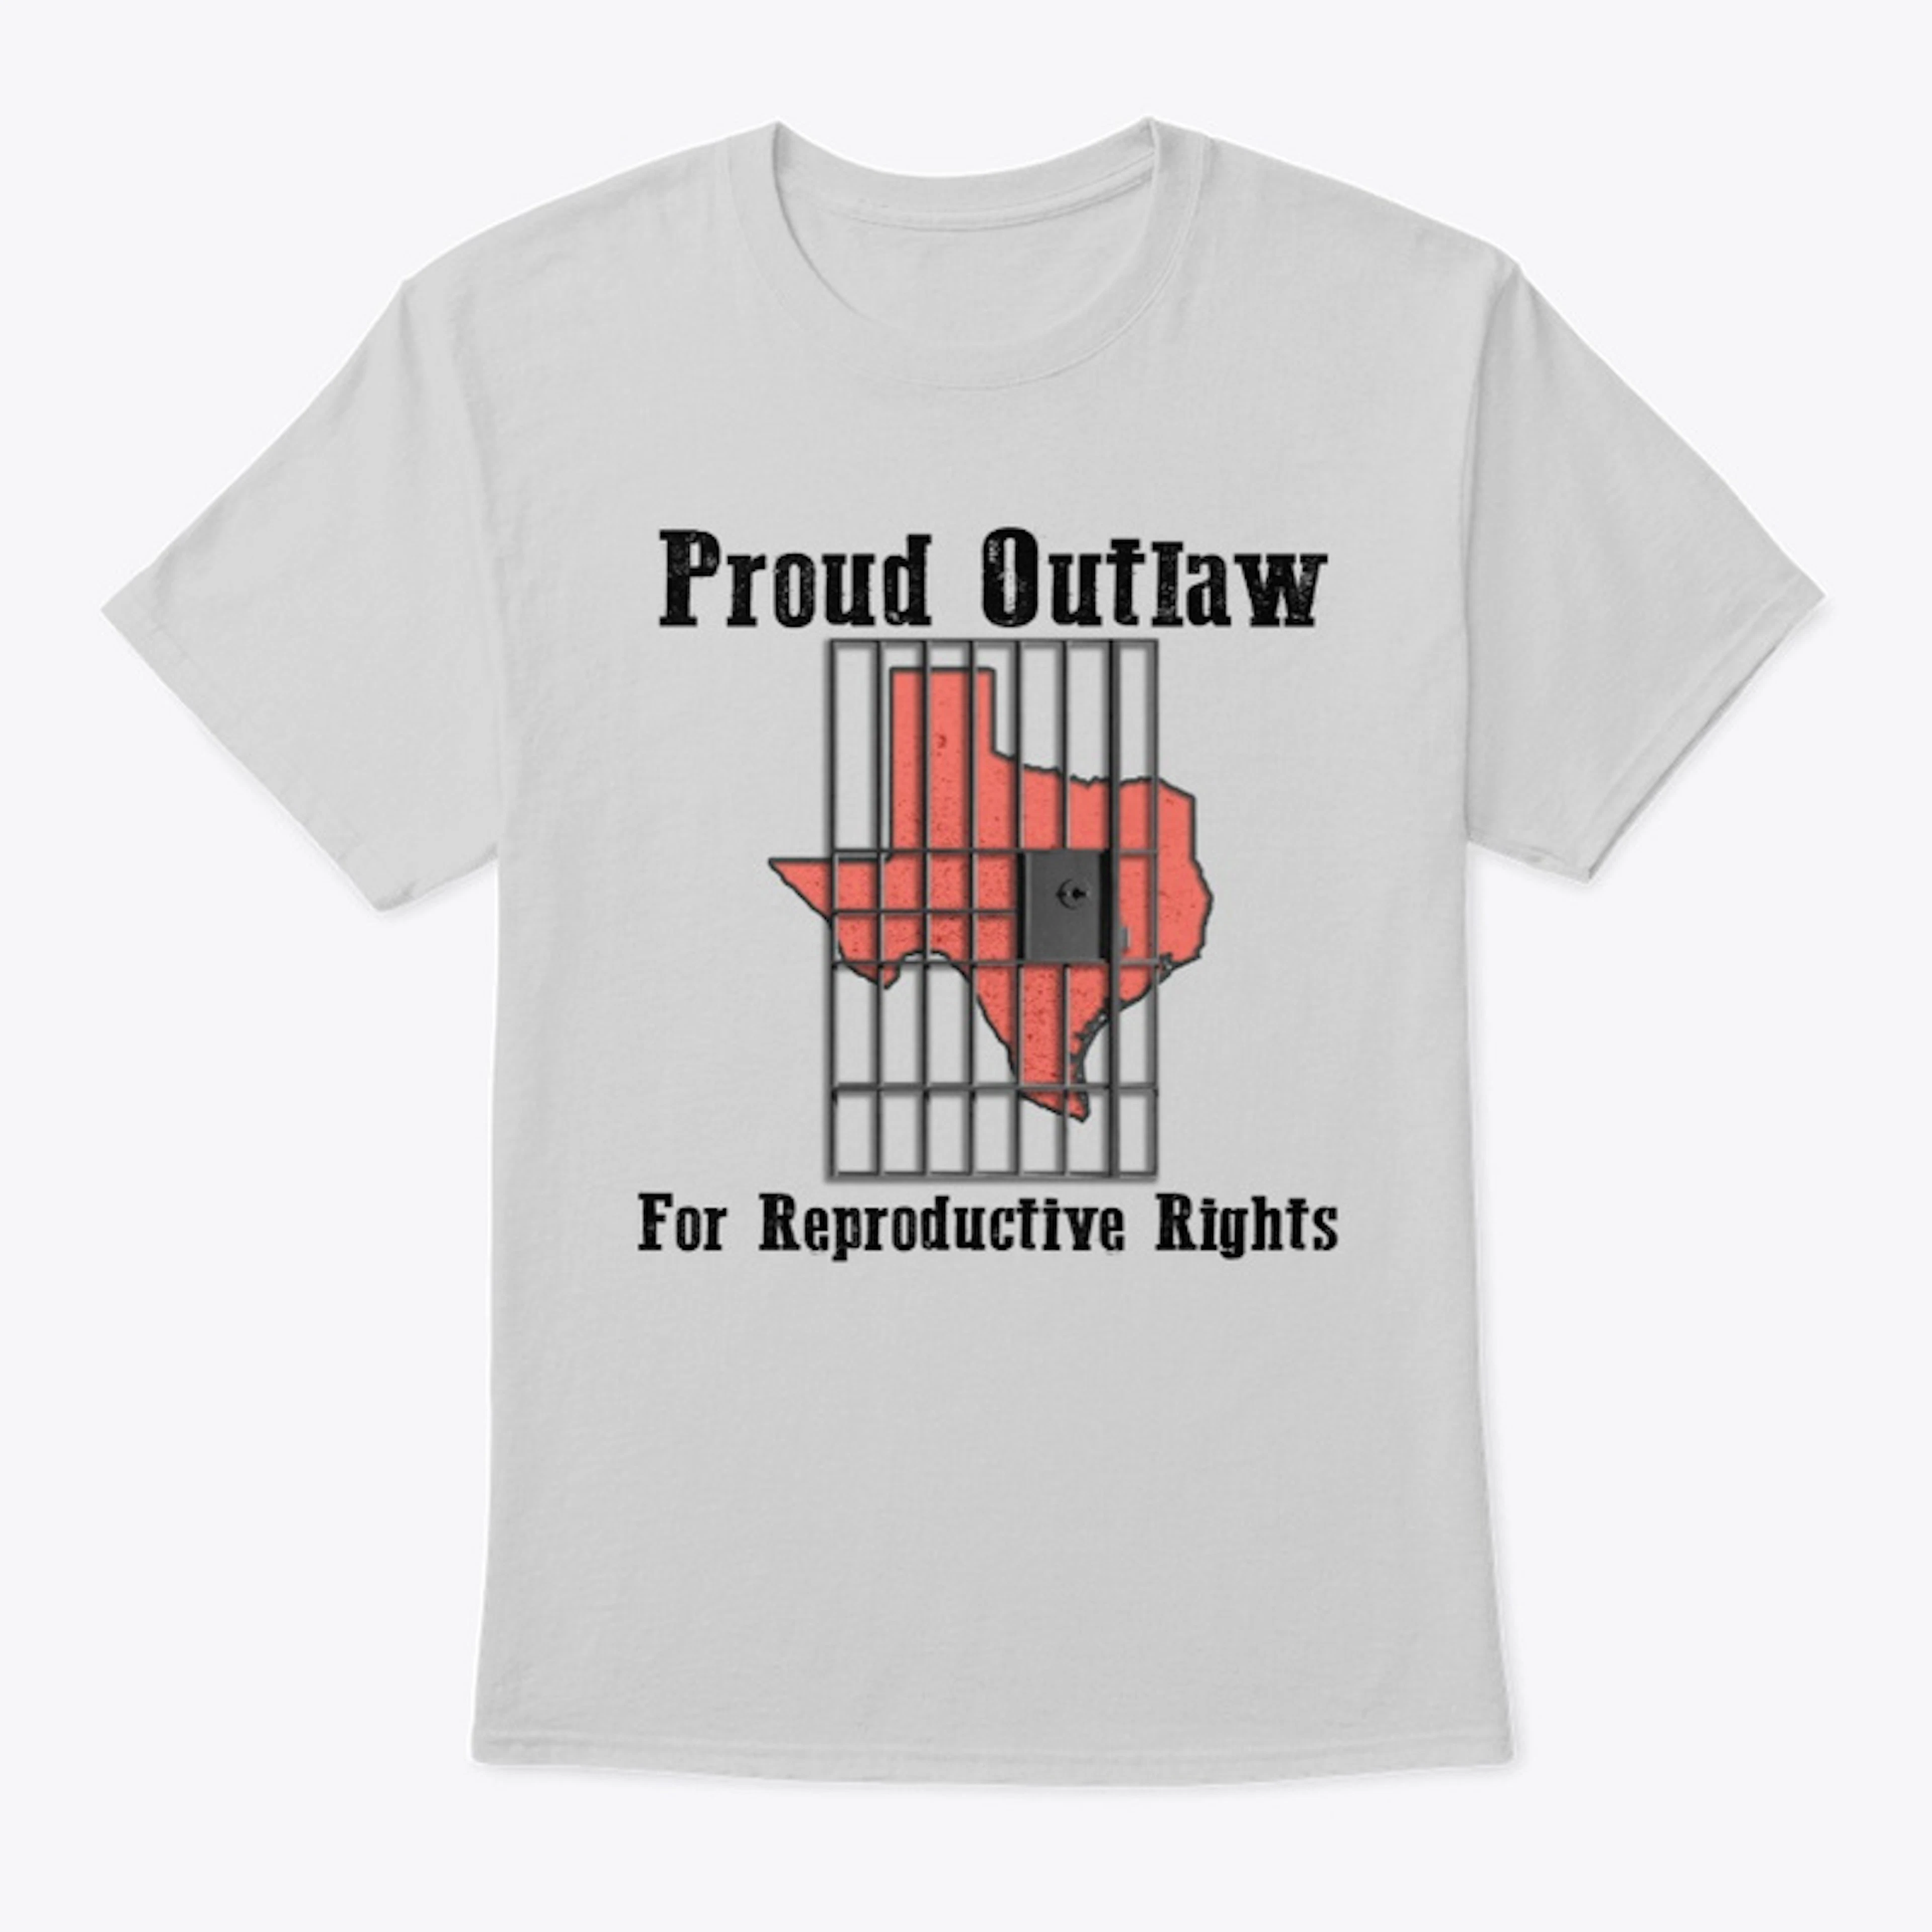 Proud Outlaw for Reproductive Rights